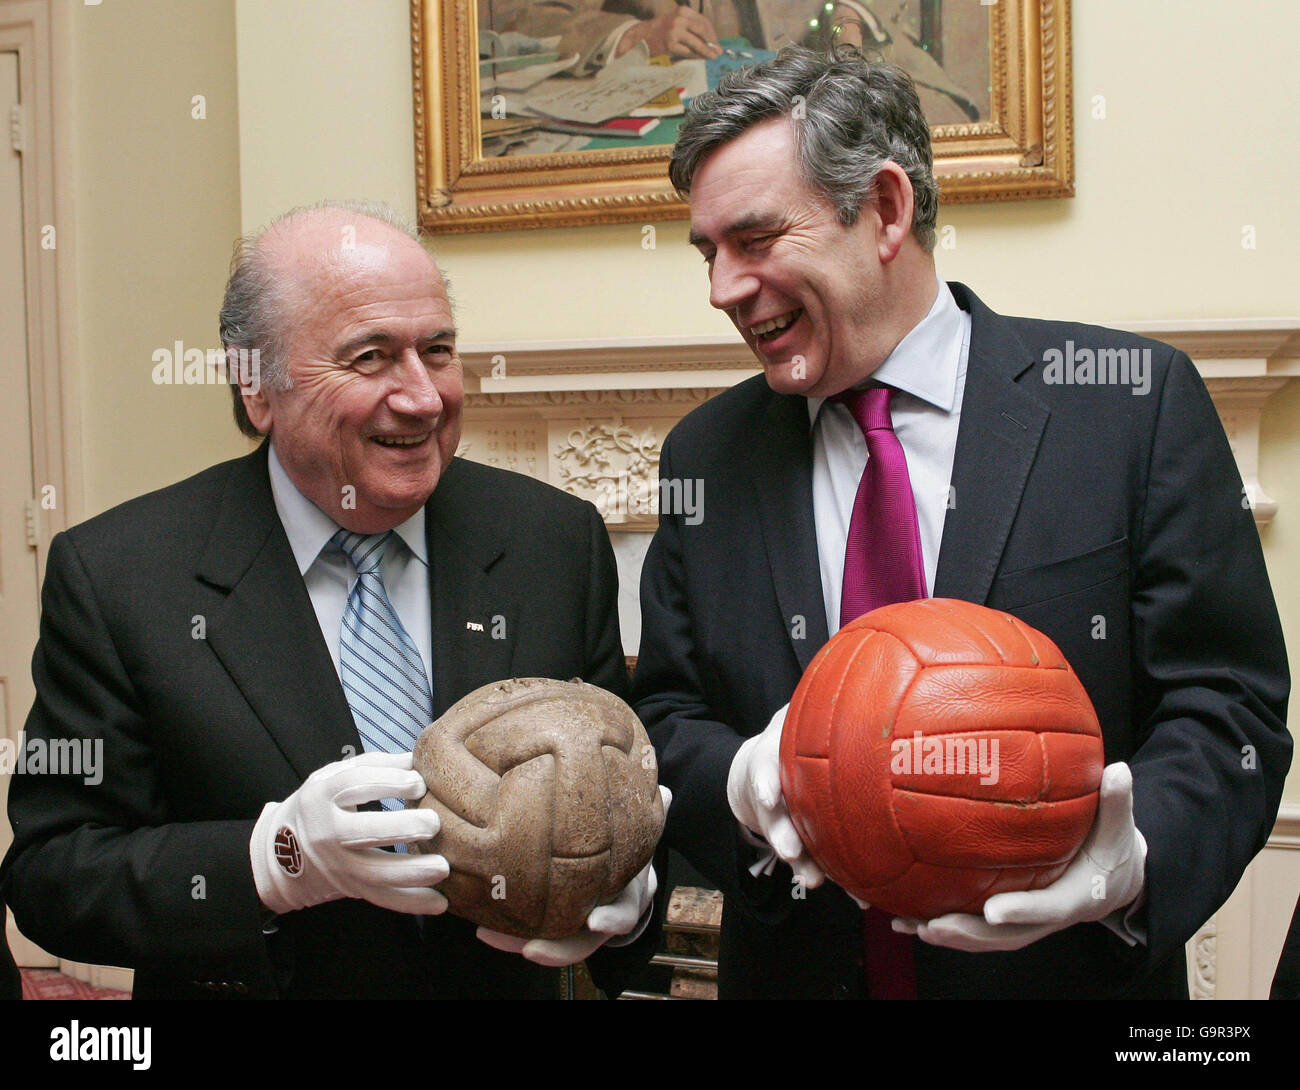 FIFA's President Sepp Blatter (L) holds the ball used in the 1930 Football  World Cup as he meets in central London with Britain's Chancellor Gordon  Brown (R), who holds the 1966 Football